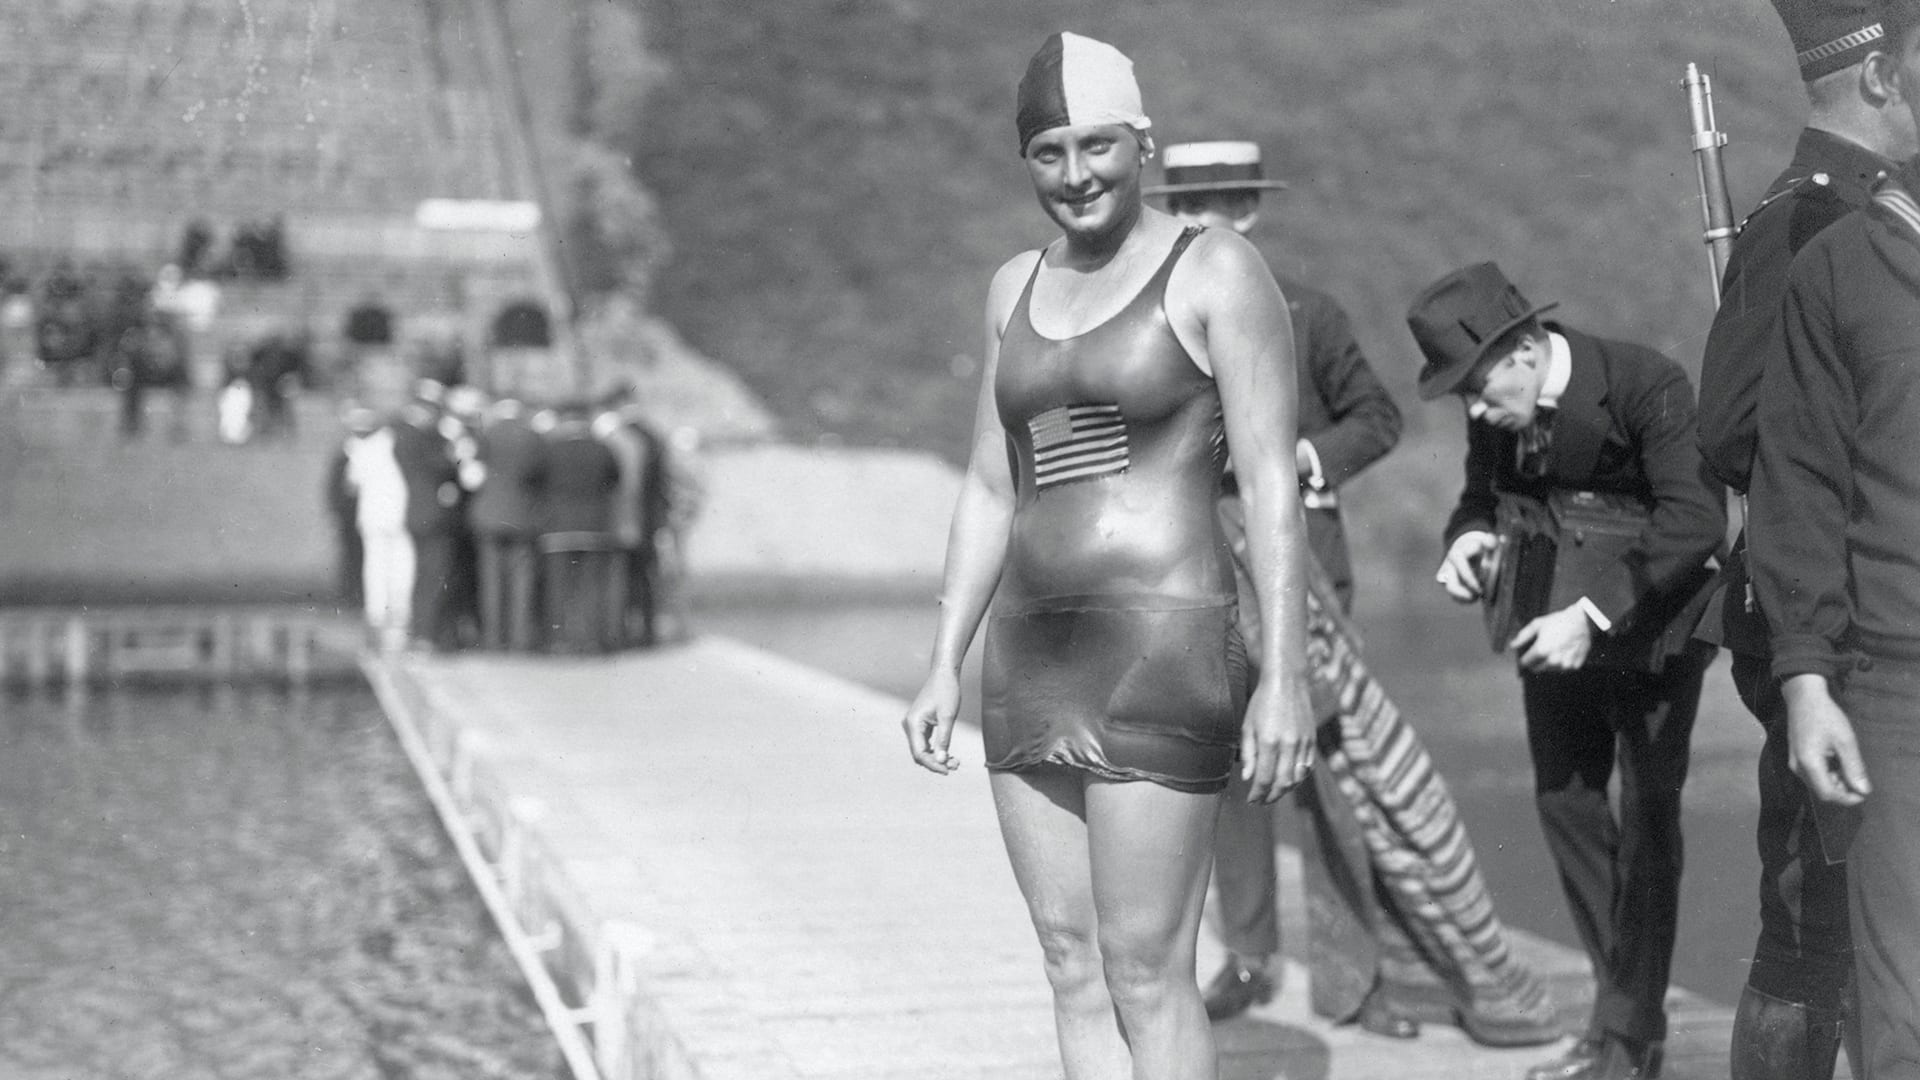 Ethelda Bleibtrey, the trailblazer for women's swimming who was arrested  due to her swimsuit - Olympic News